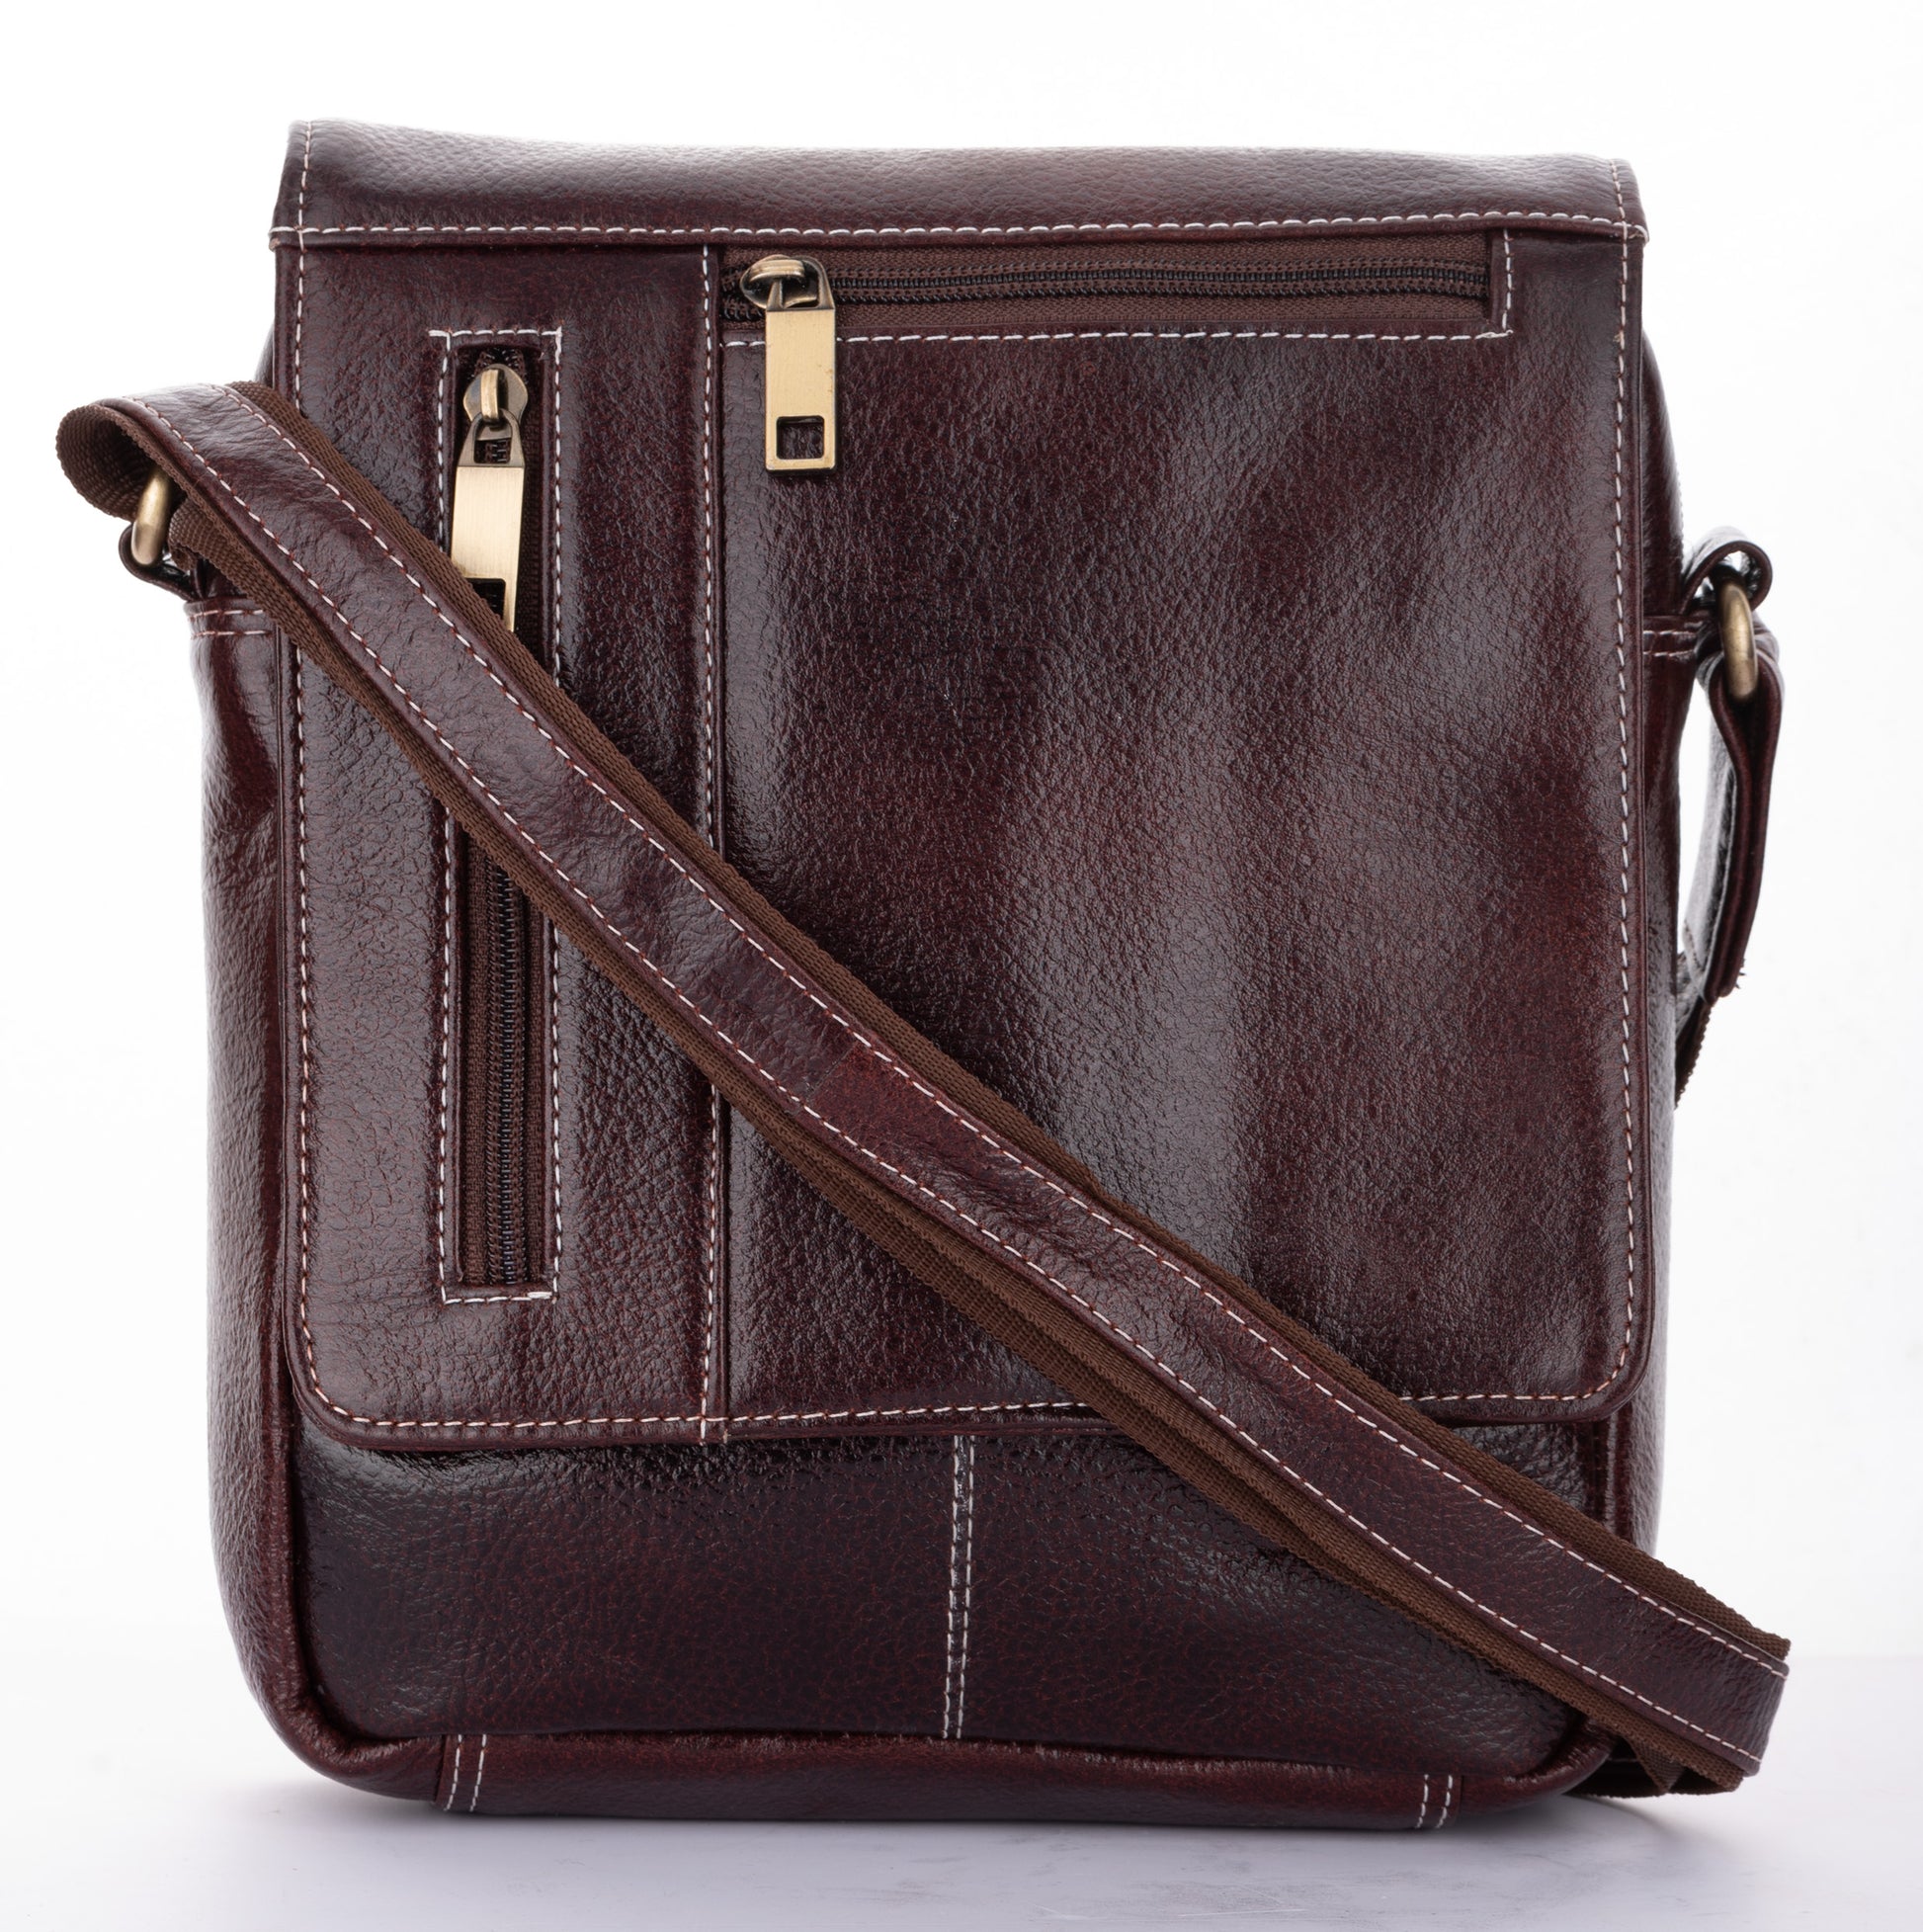 pure-leather-unisex-brown-cross-body-sling-messenger-bag-12-9-mb01